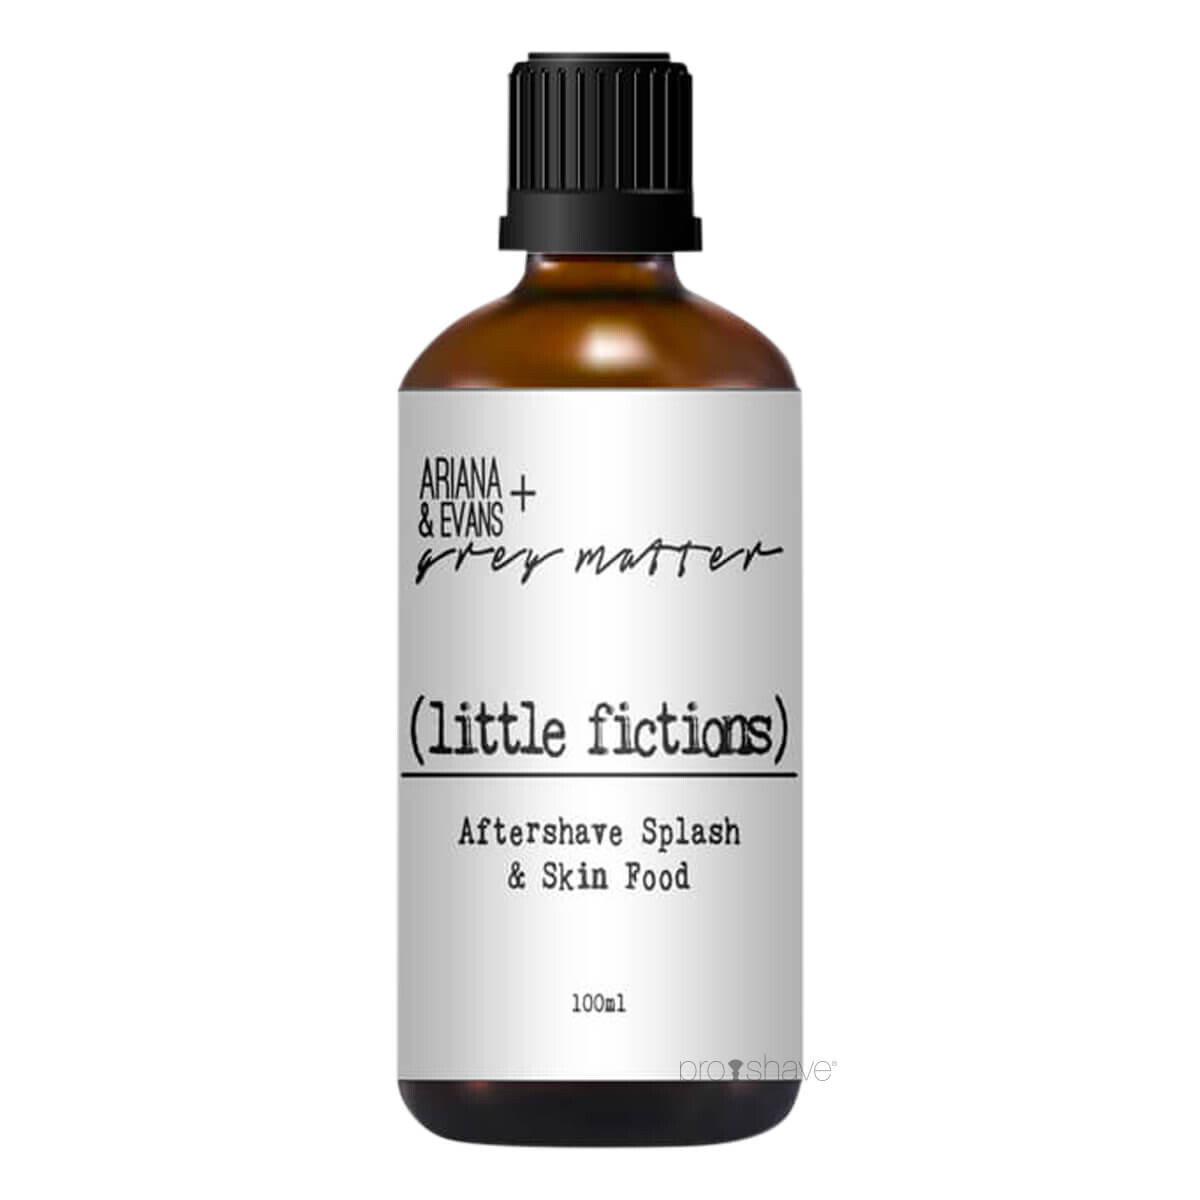 Ariana & Evans Aftershave, Little Fictrion, 100 ml.